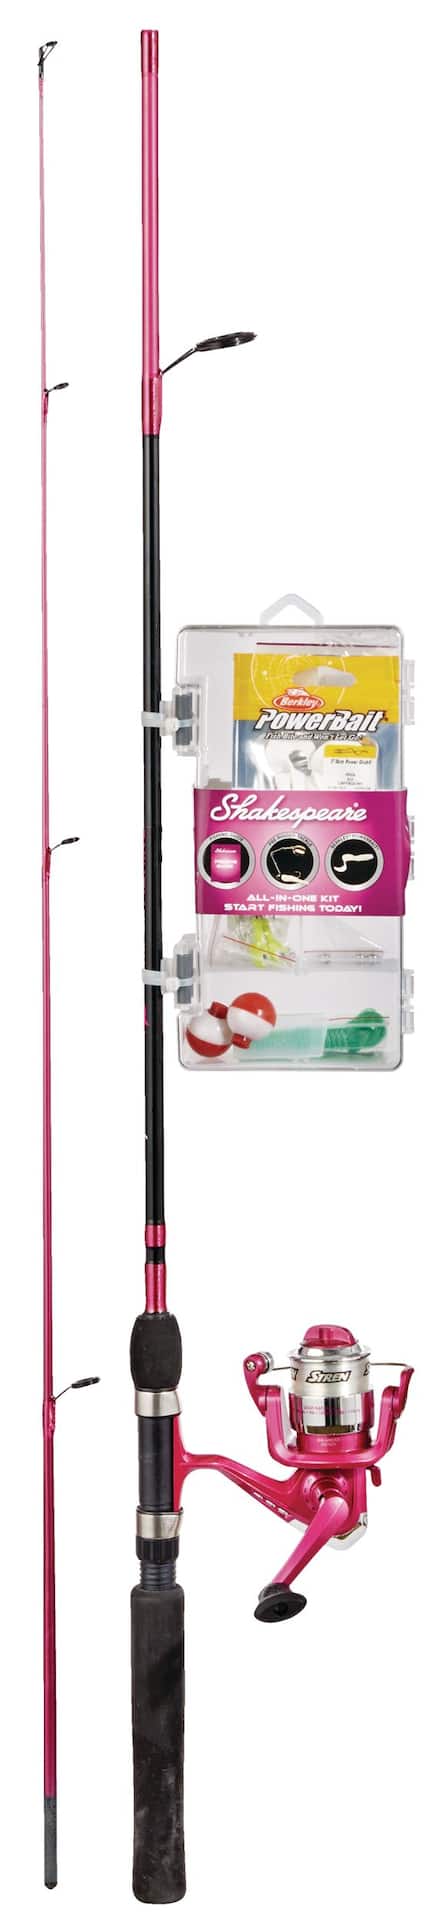 Shakespeare Disney's Frozen Kids Spincast Fishing Rod and Reel Combo,  Pre-Spooled, Right Hand, 2.5-ft